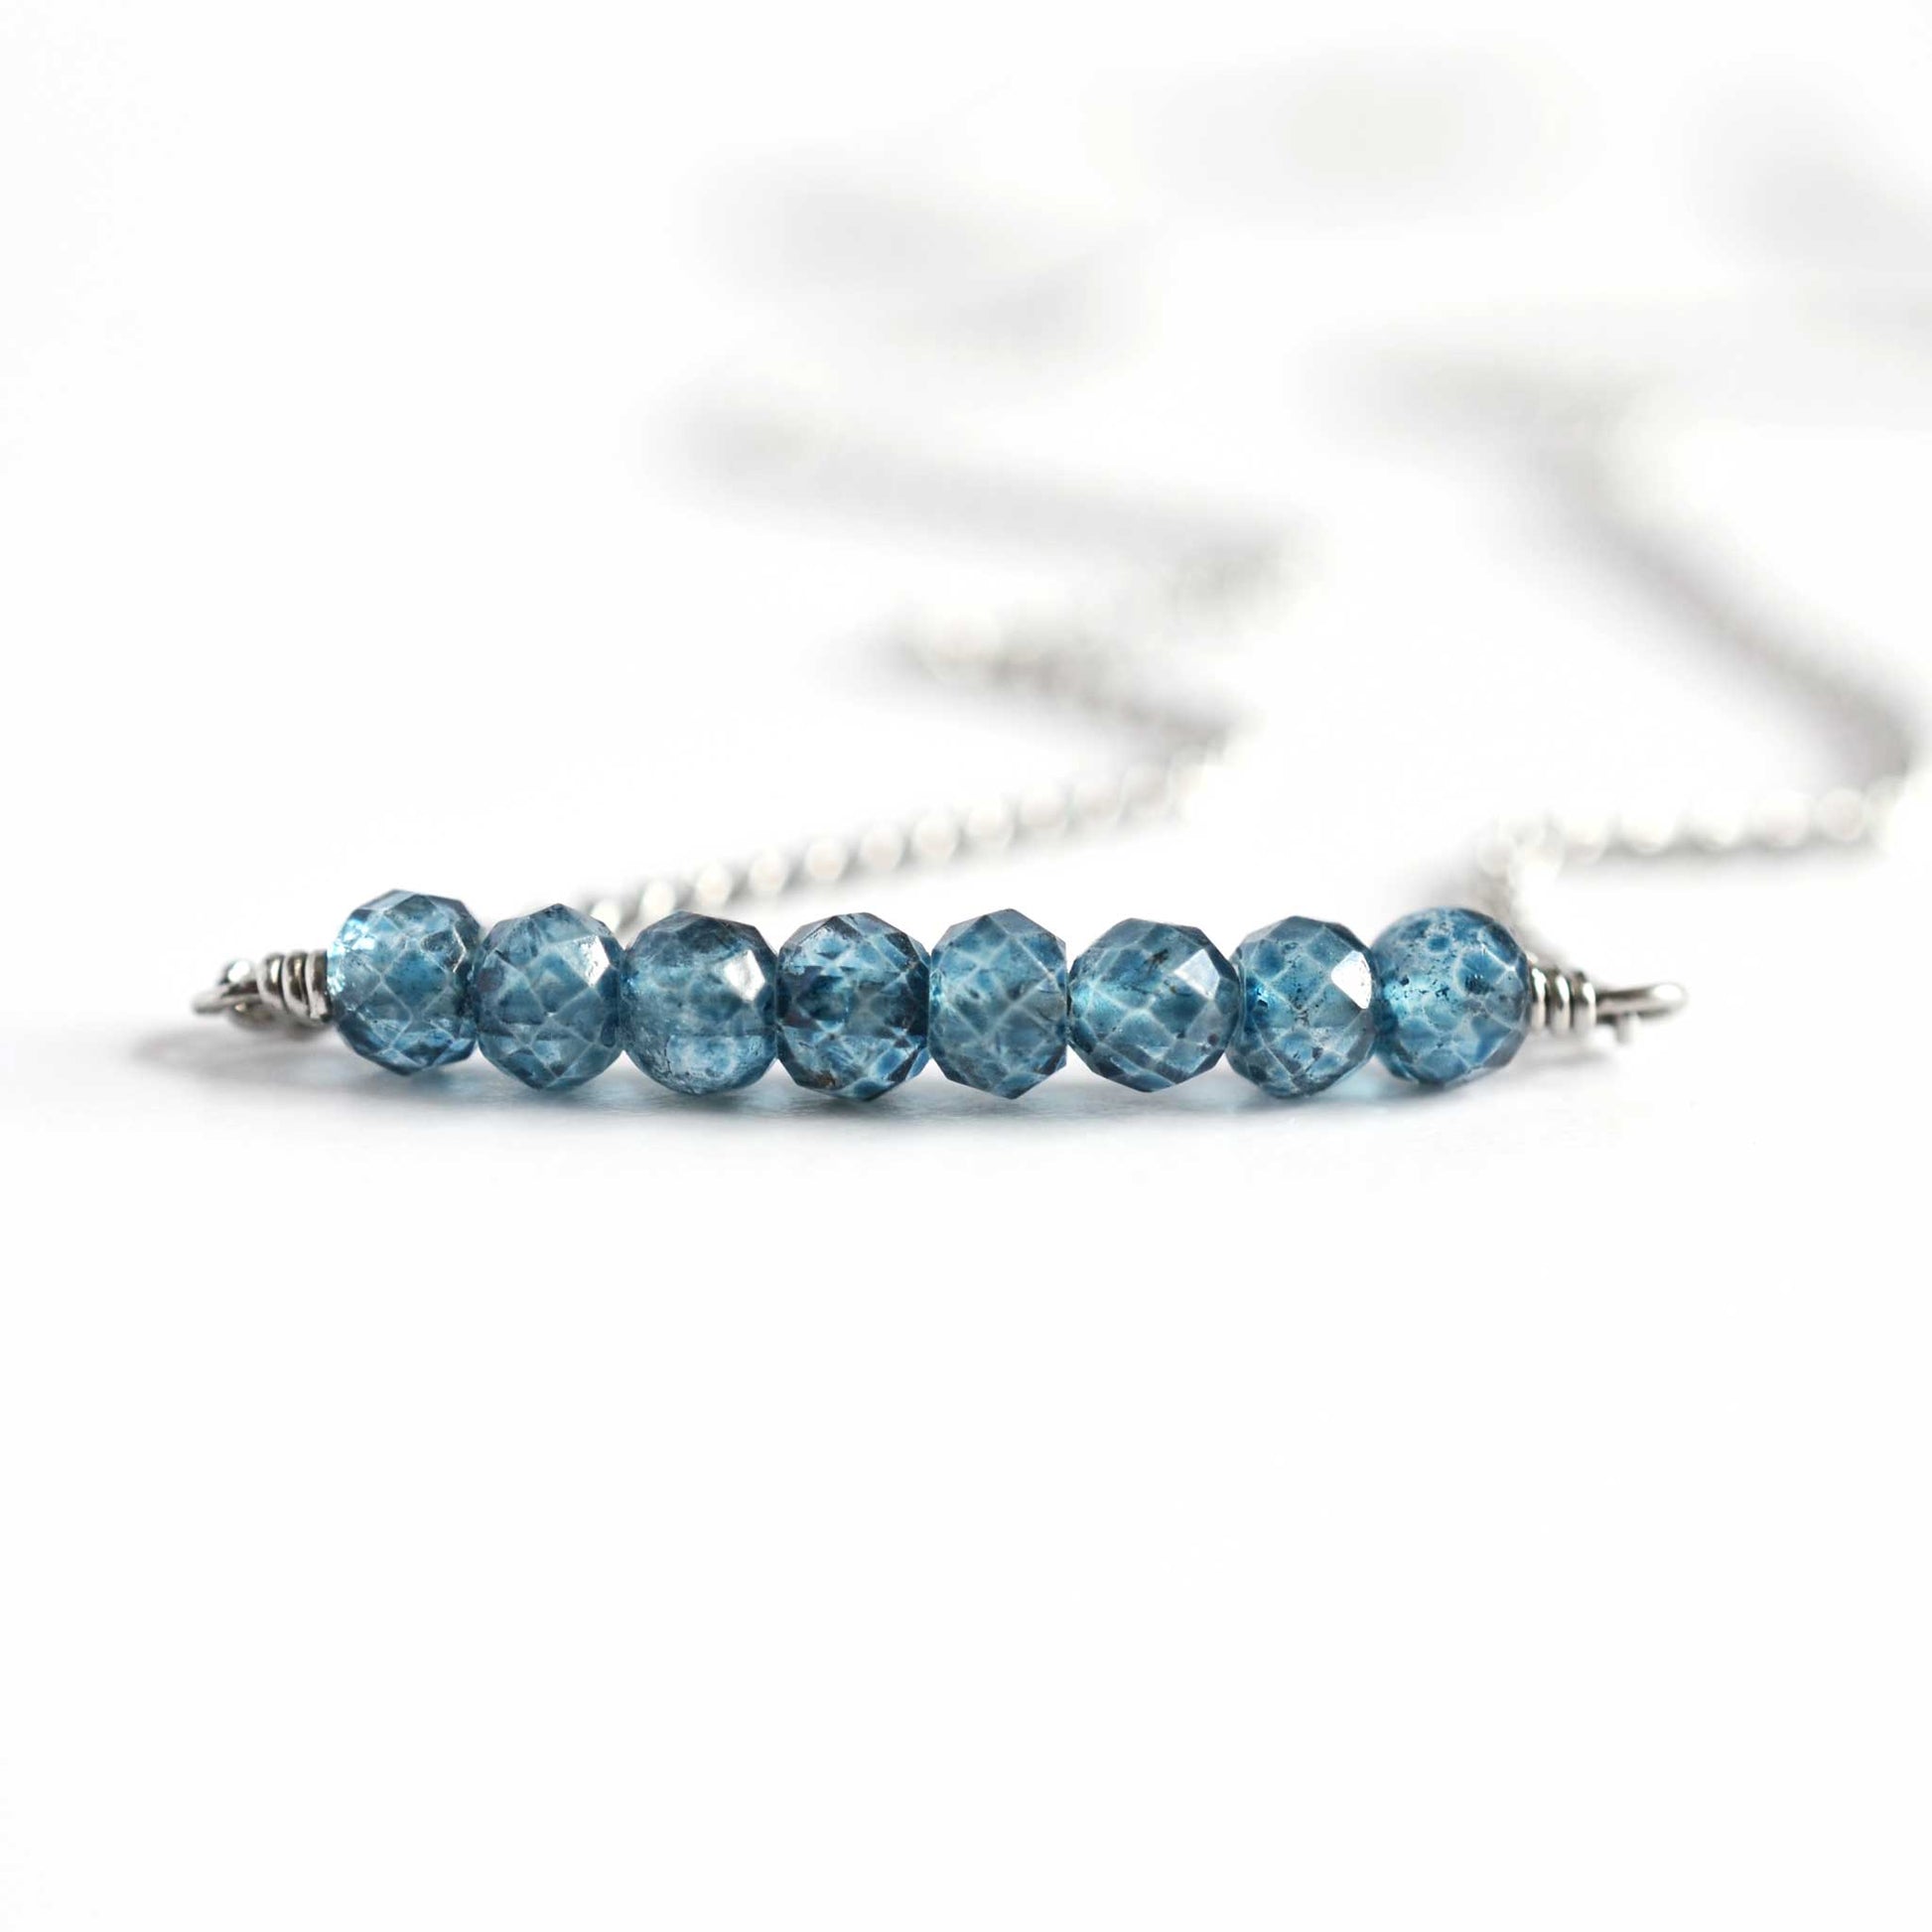 Close up of blue Topaz necklace with seven small round faceted blue Topaz gemstone beads